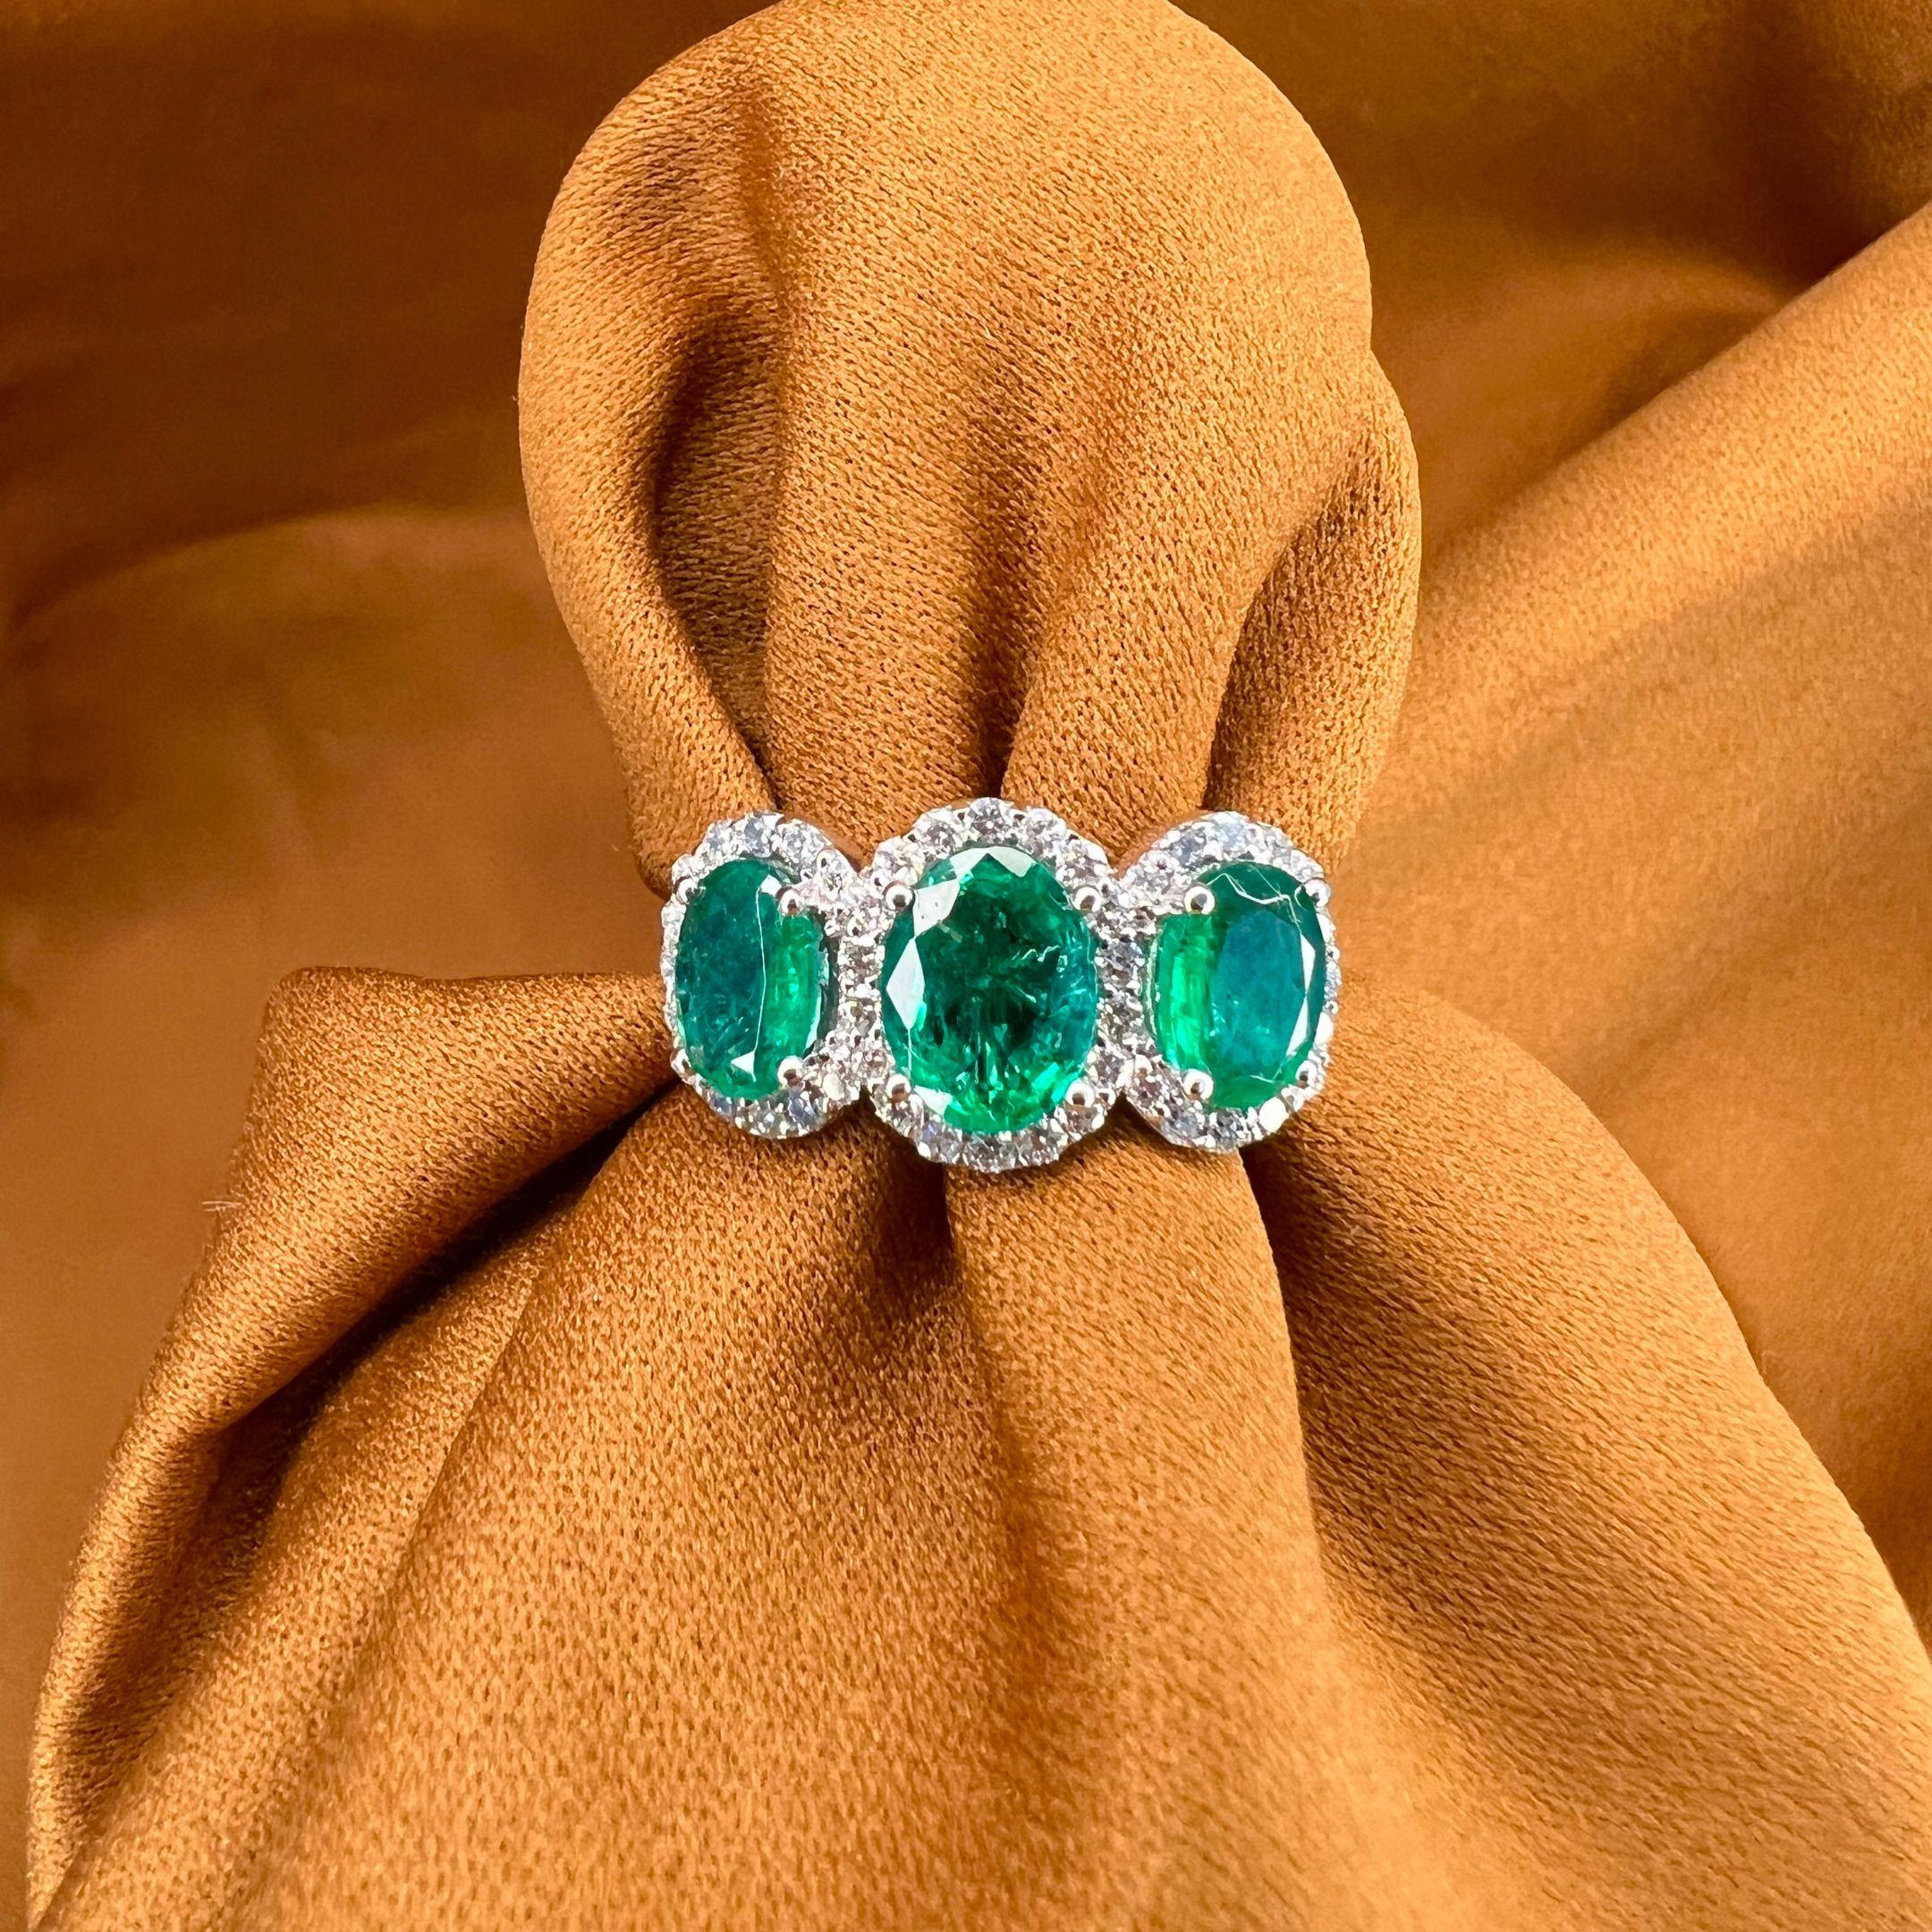 Emerald Weight: 2.75 CTs
Measurements: 8x6/7x5 mm
Diamond Weight: 0.48 CTs
Metal: 18K White Gold 
Gold Weight: 5.46 gm
Ring Size: 7
Shape: Oval
Color: Intense Green
Hardness: 7.5-8
Birthstone: May
Product ID: MUR25317/Line 8